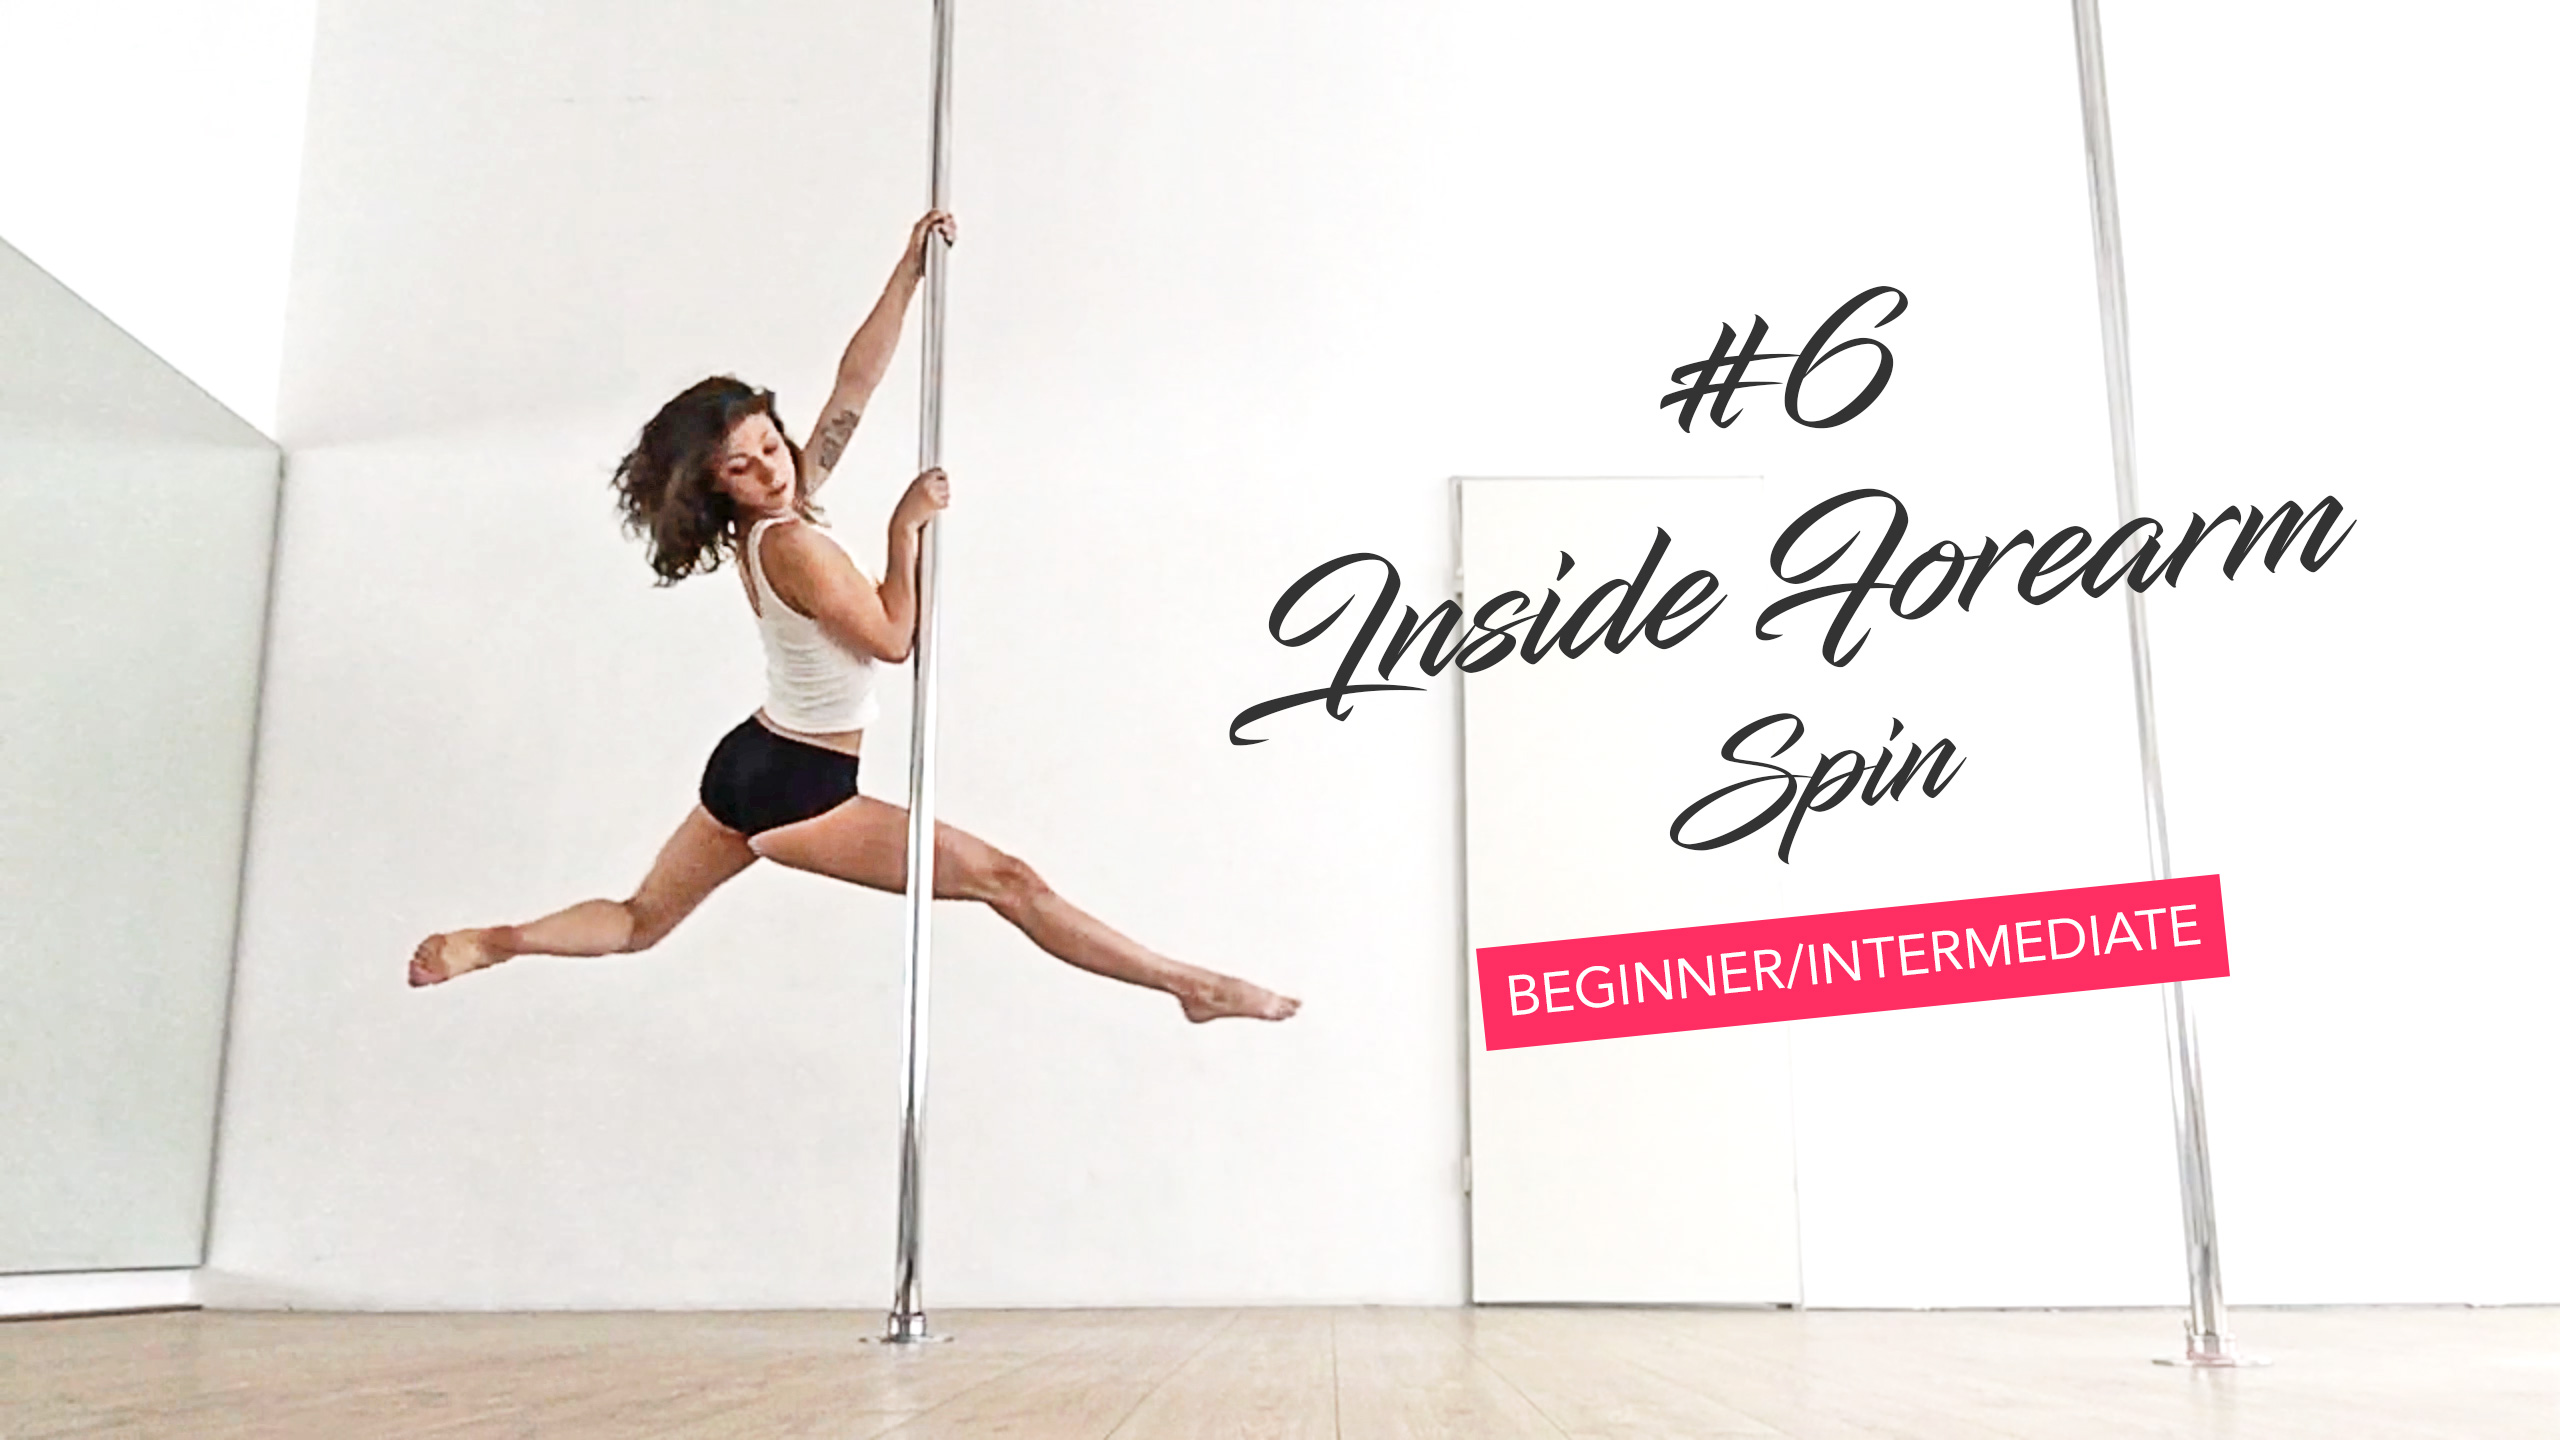 Most gorgeous pole spin with most boring name (Inside Forearm Spin